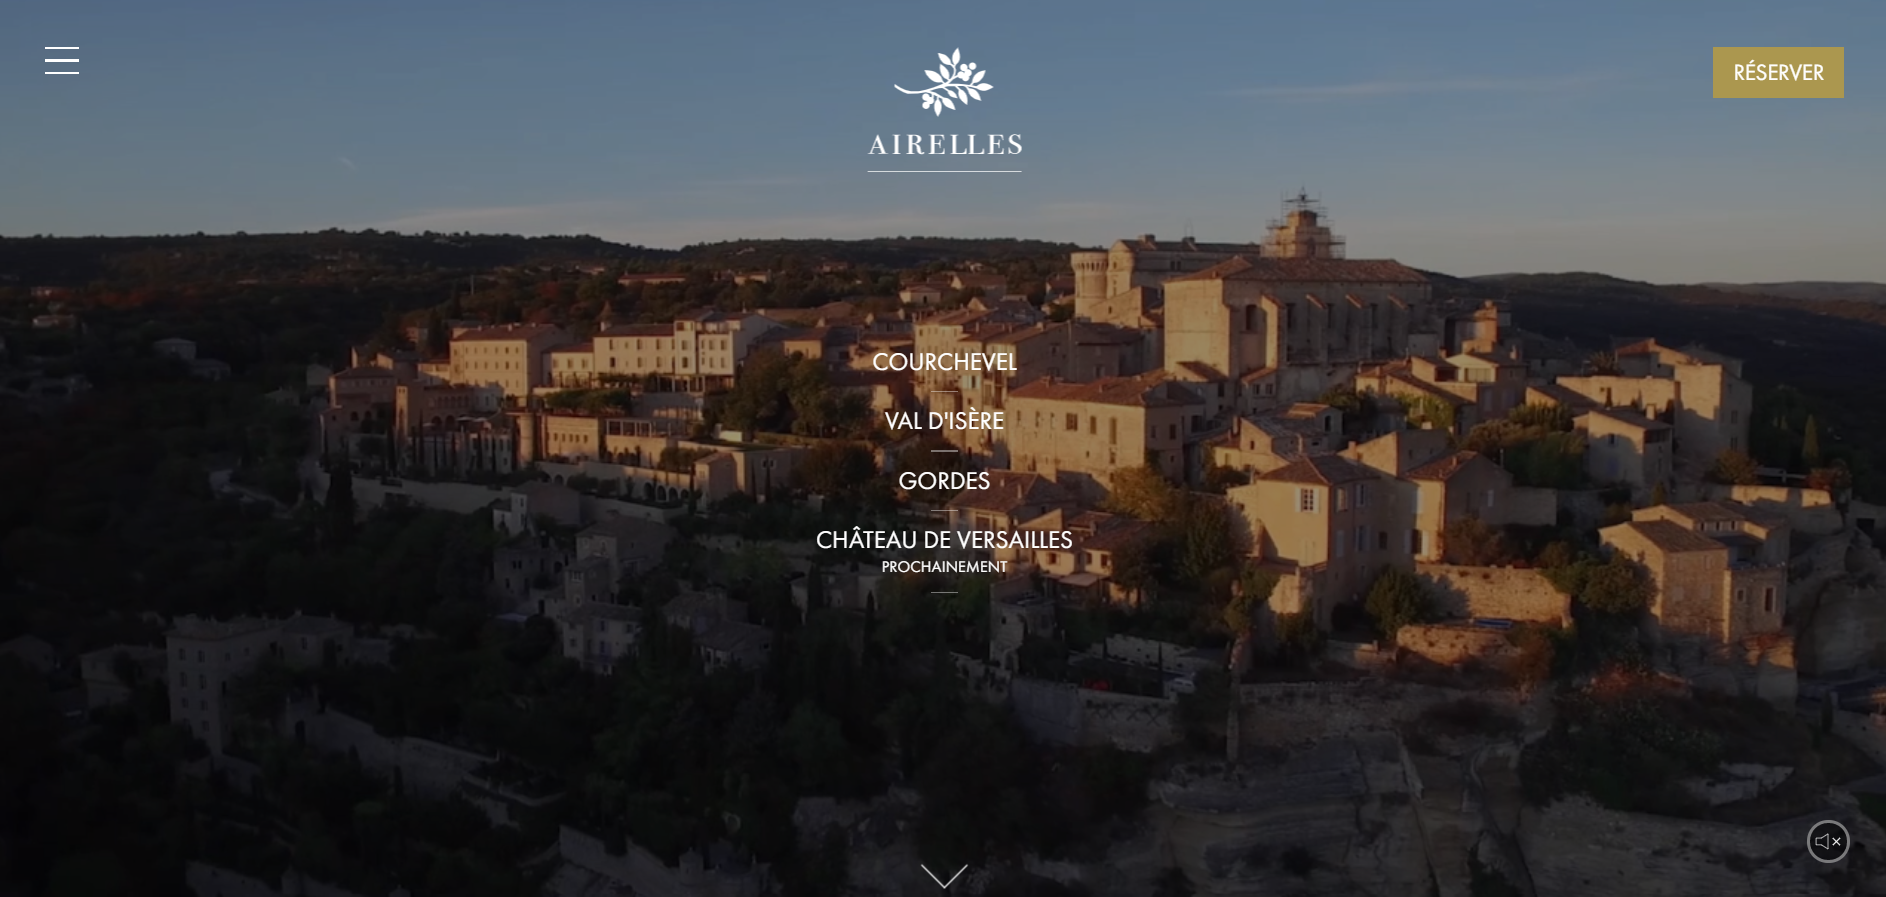 The Airelles single-page website